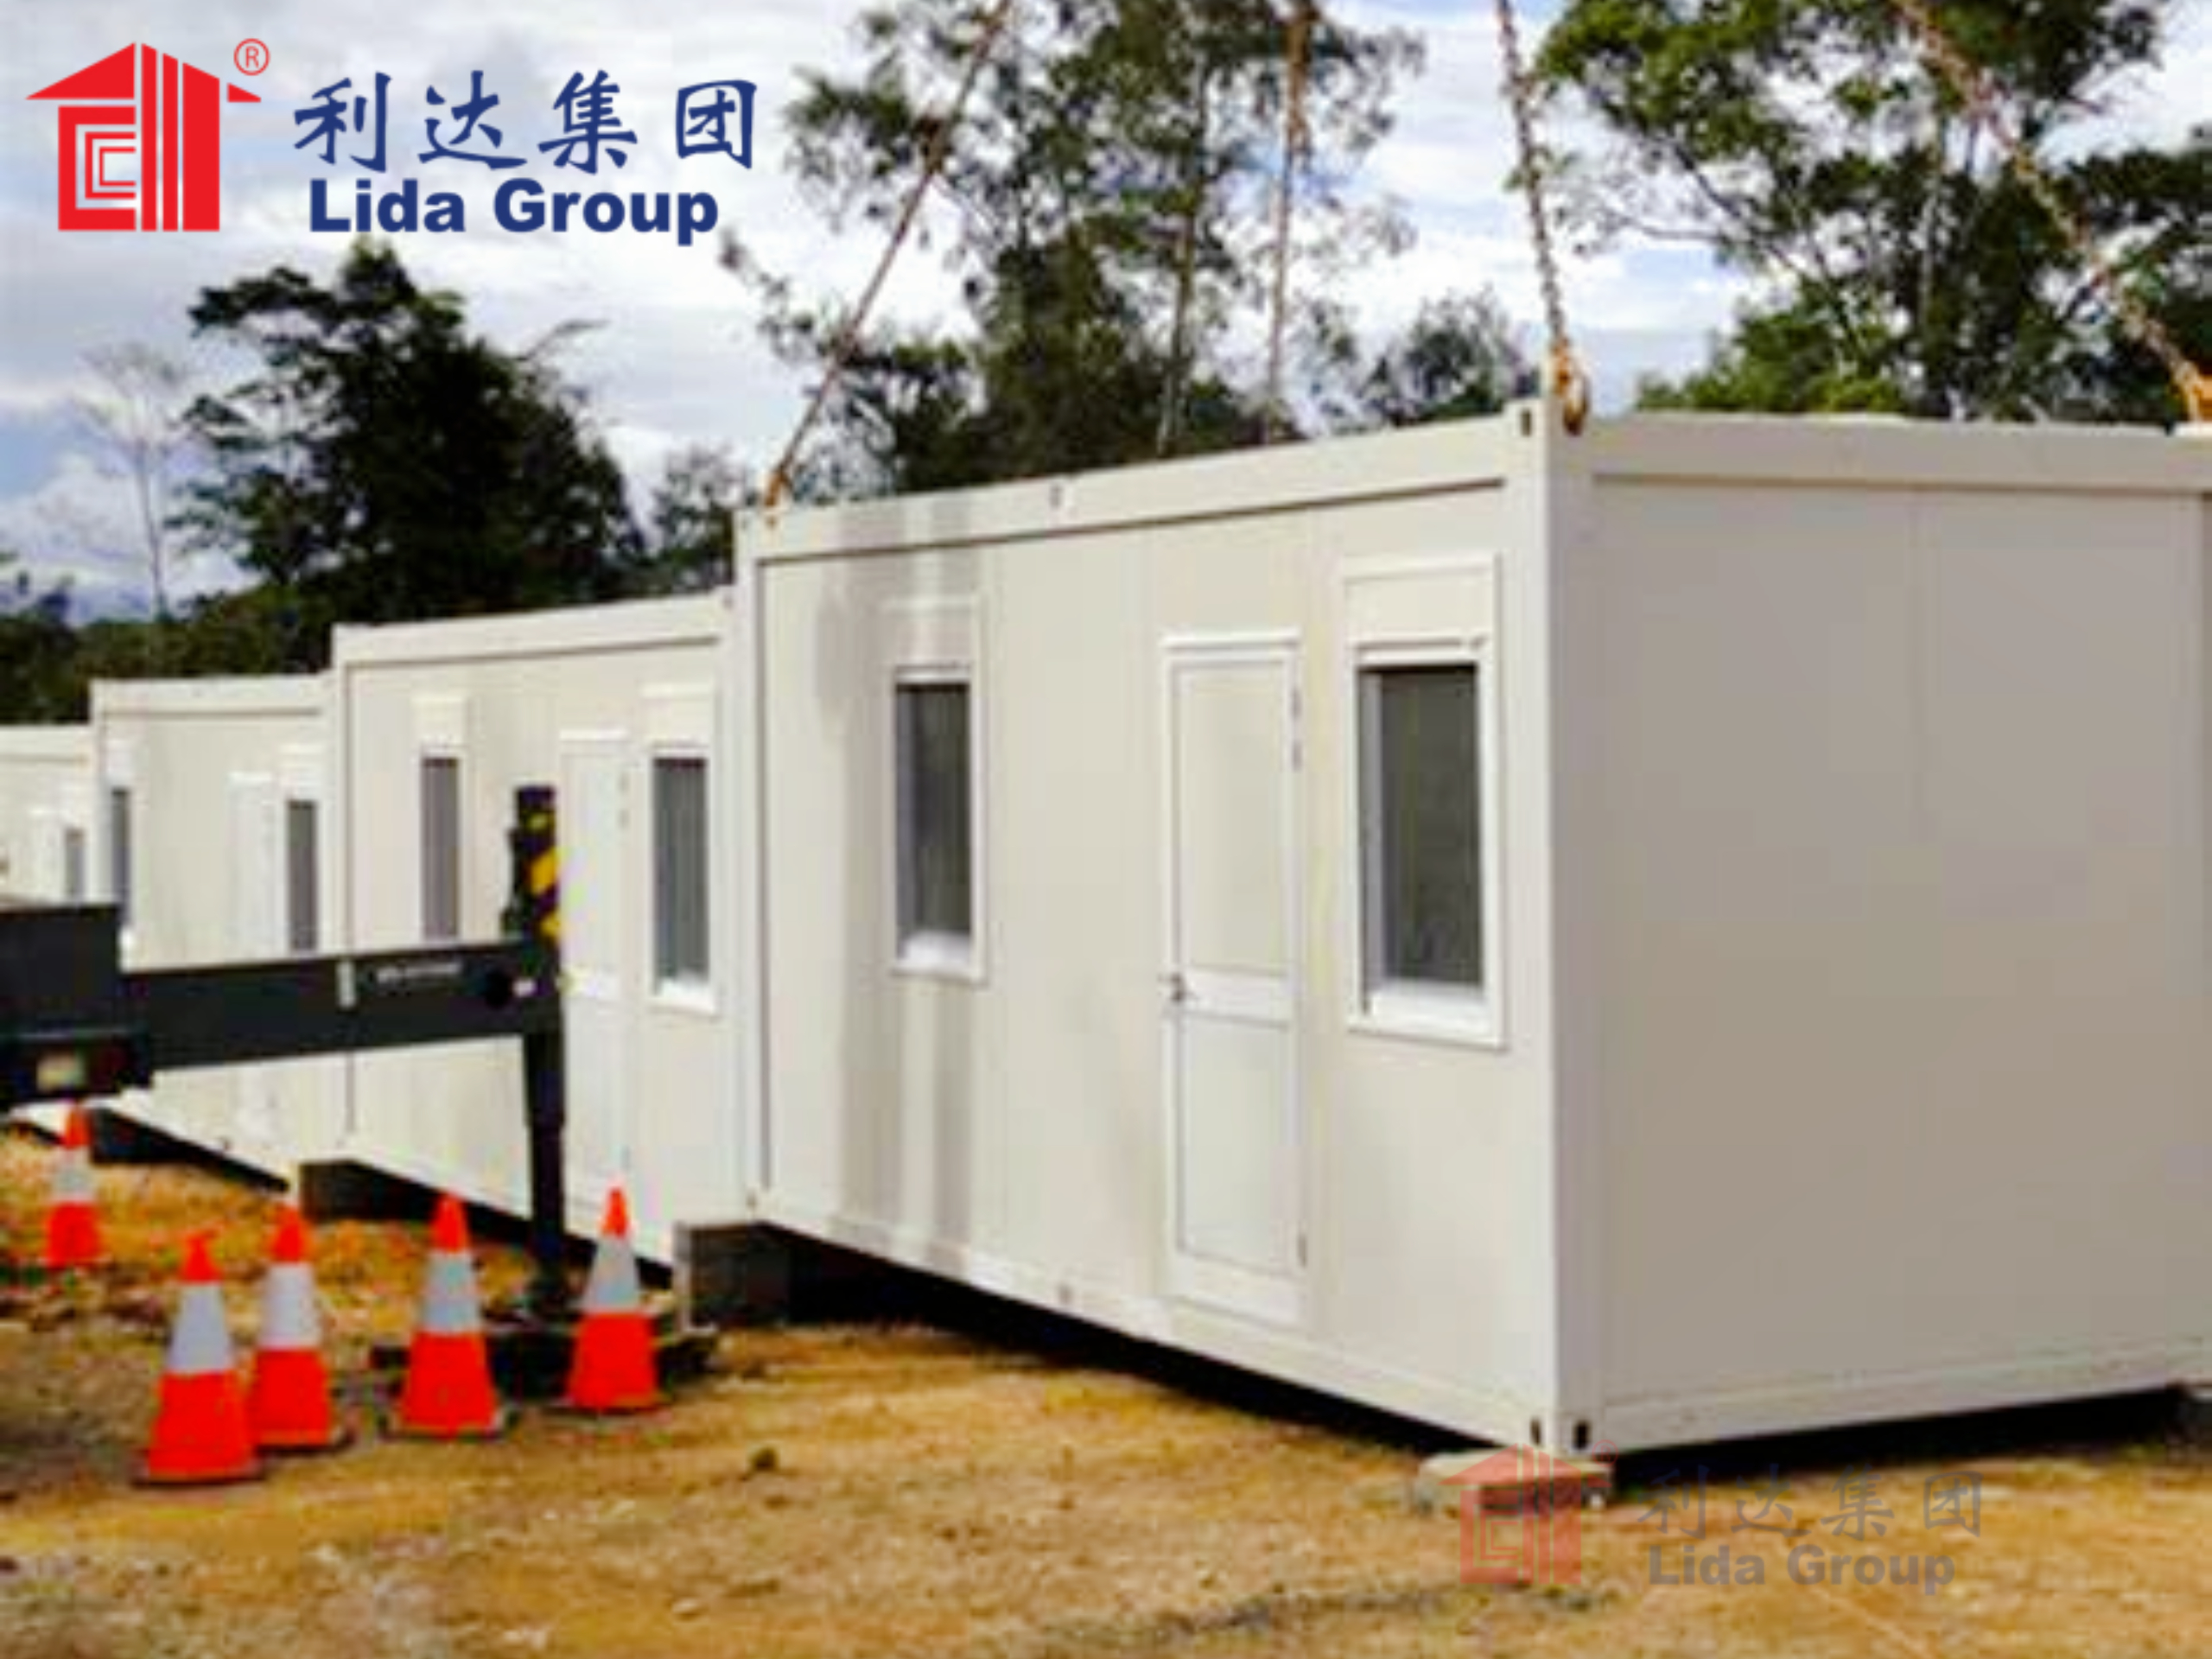 Lida group is a leading manufacturer in China for temporary camp building with prefabricated buildings and container houses.